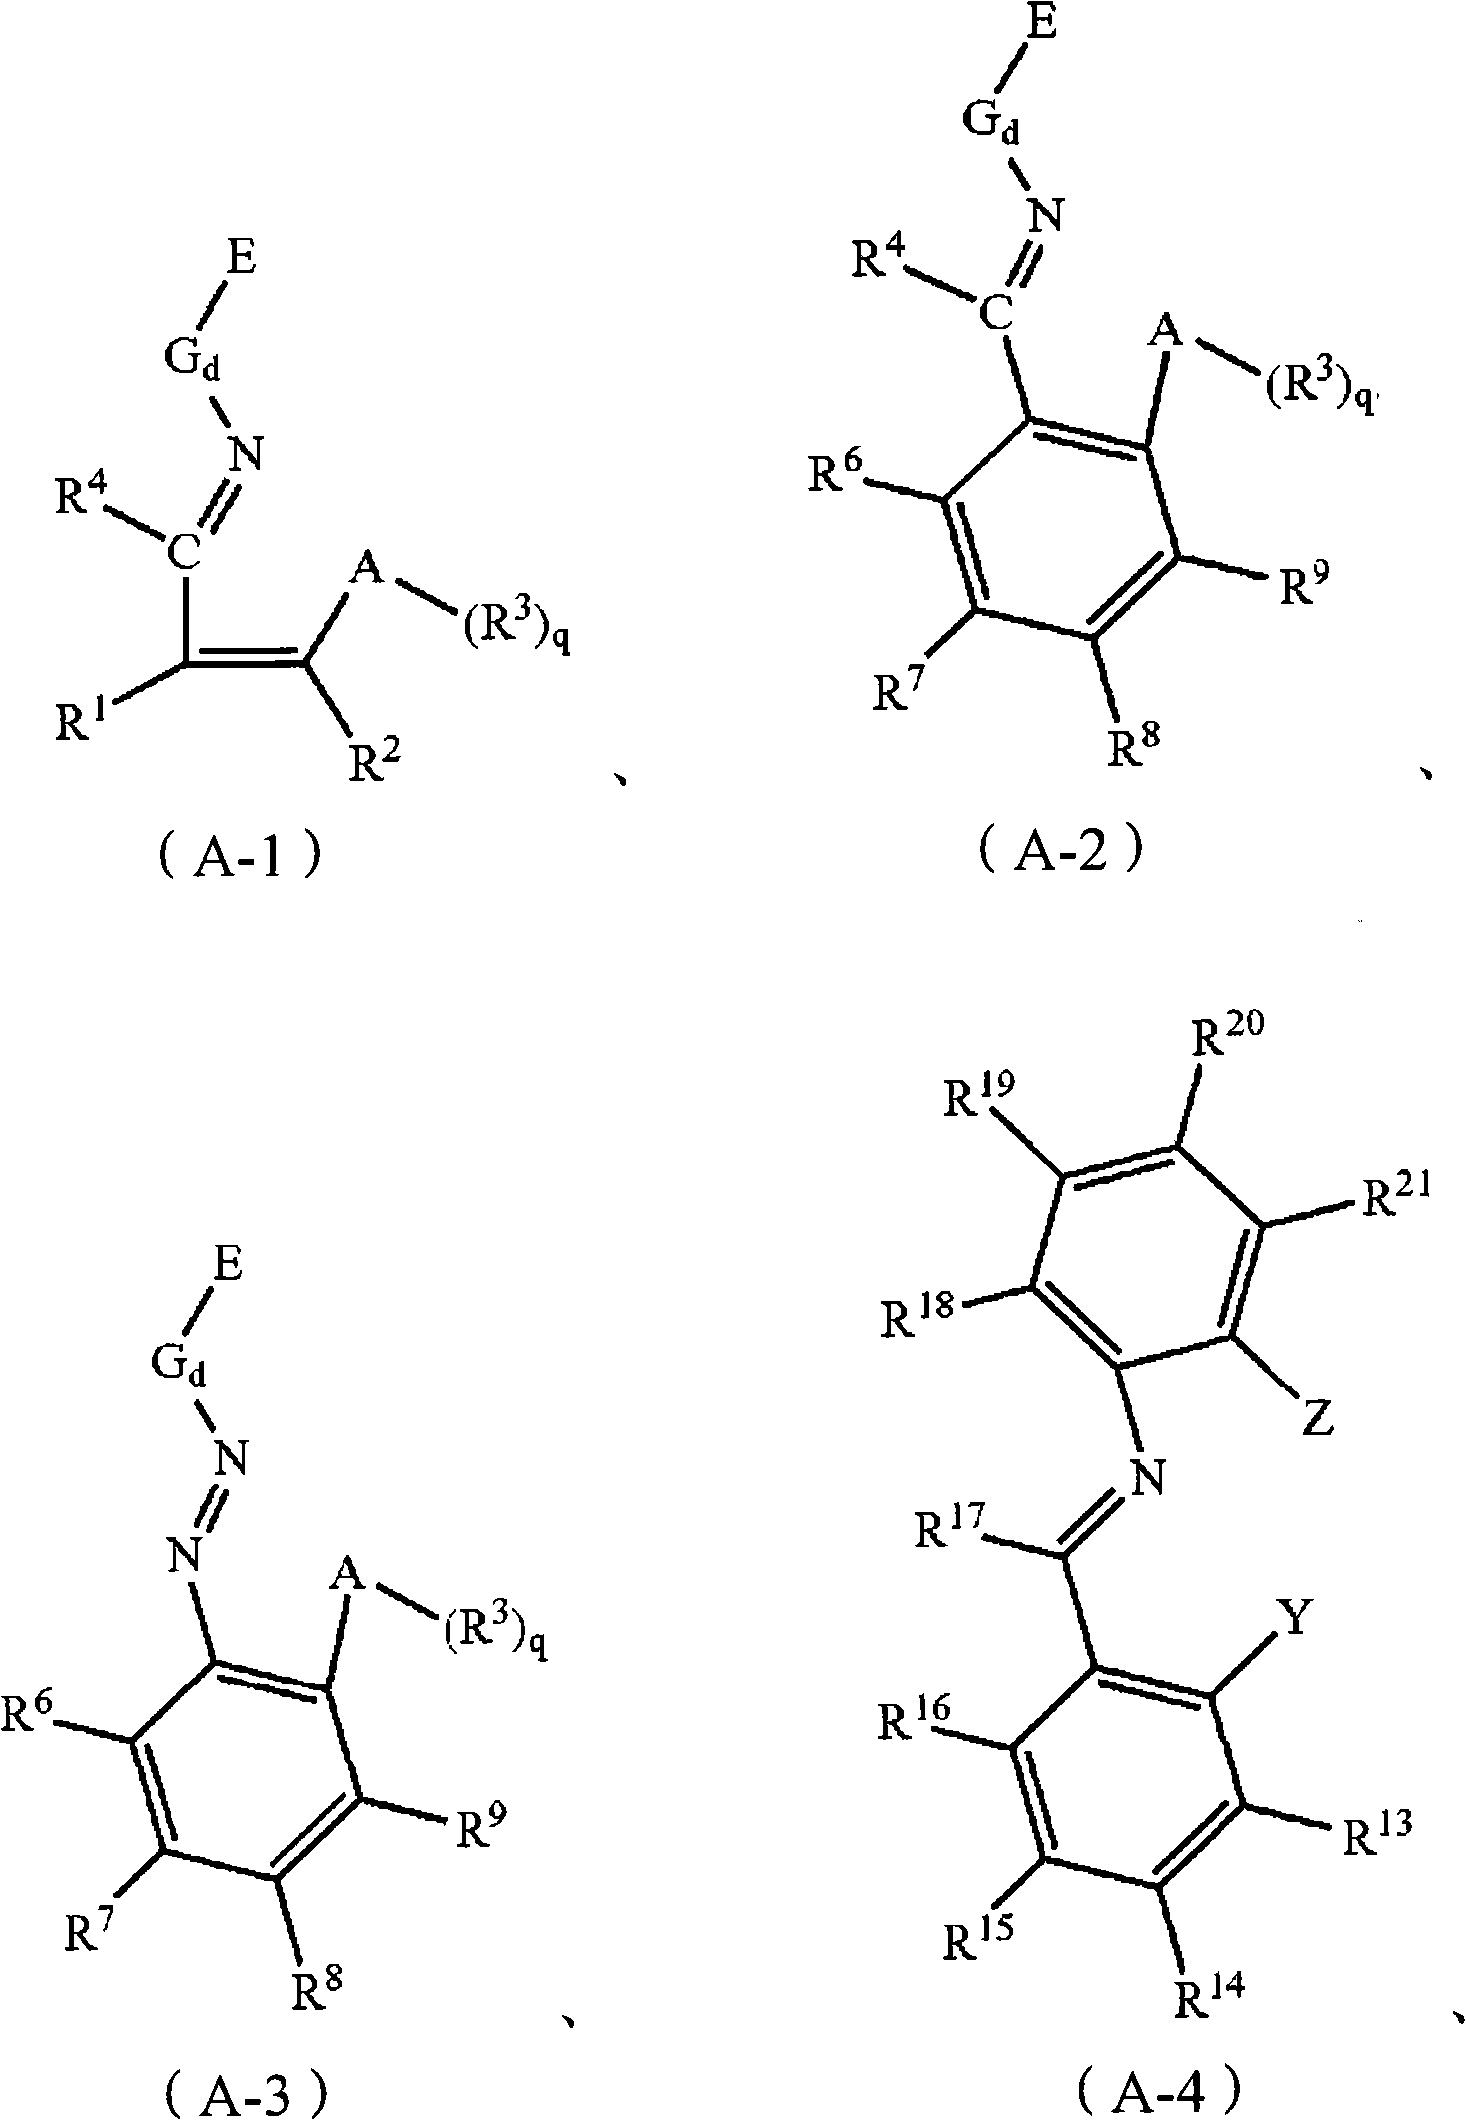 Load-type non-metallocene catalyst, preparation method thereof, and application thereof